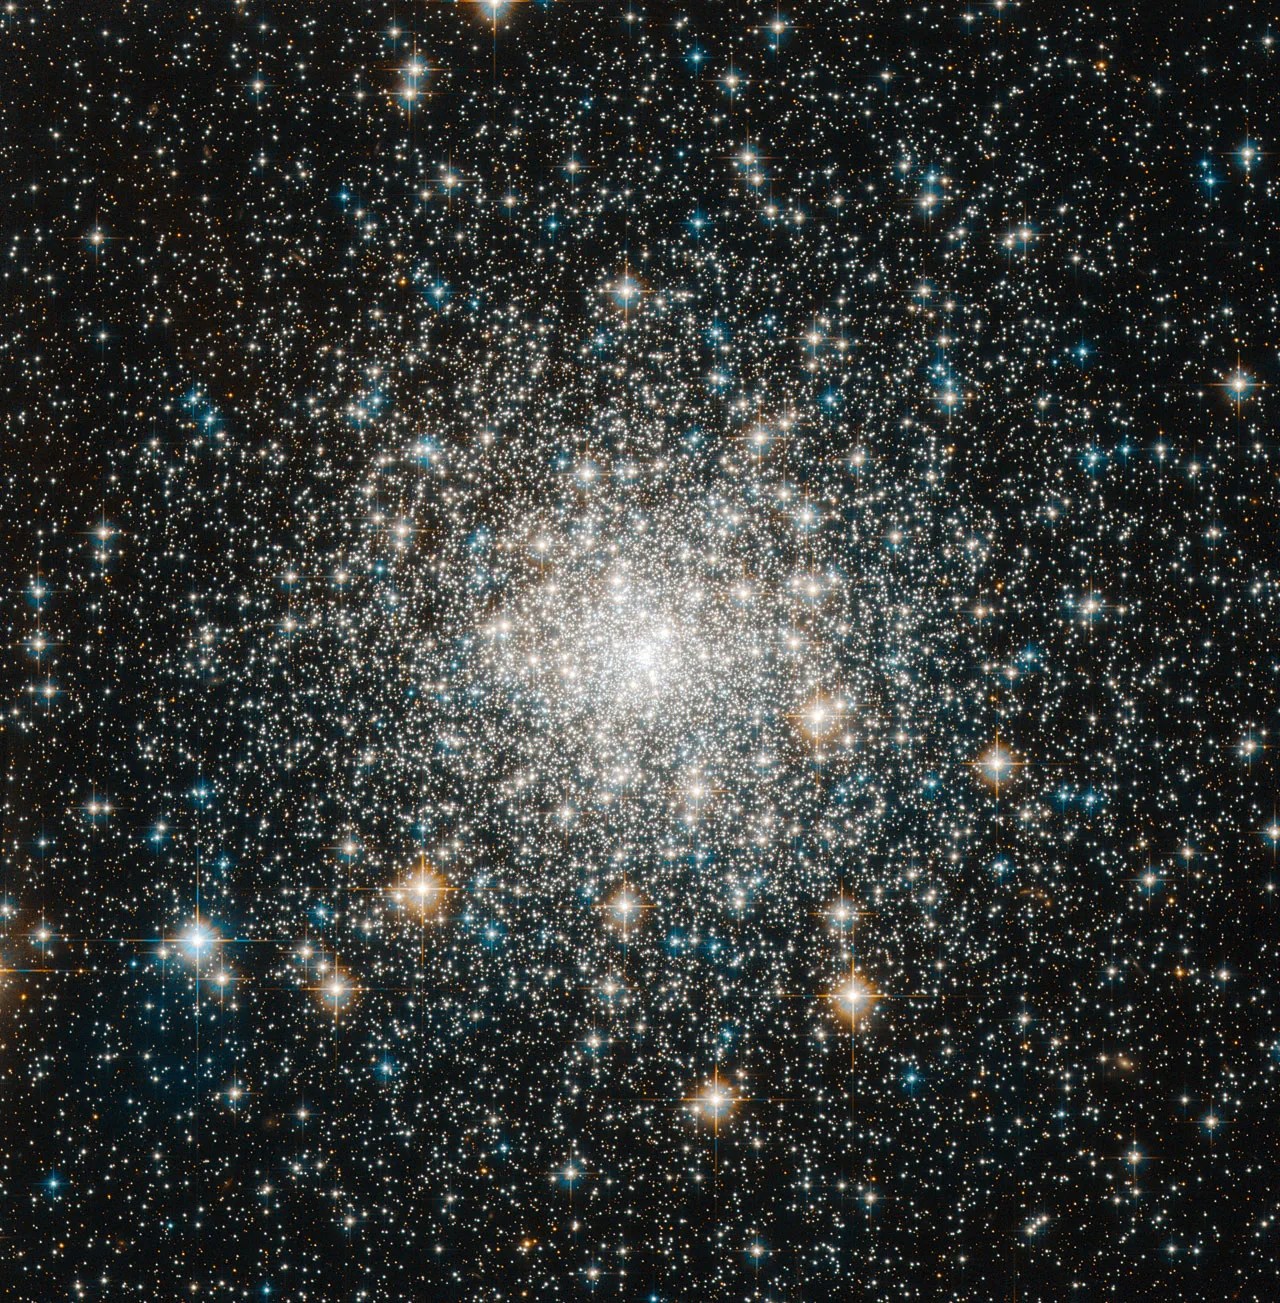 Hubble image of Messier 70 cluster is tightly packed toward the center